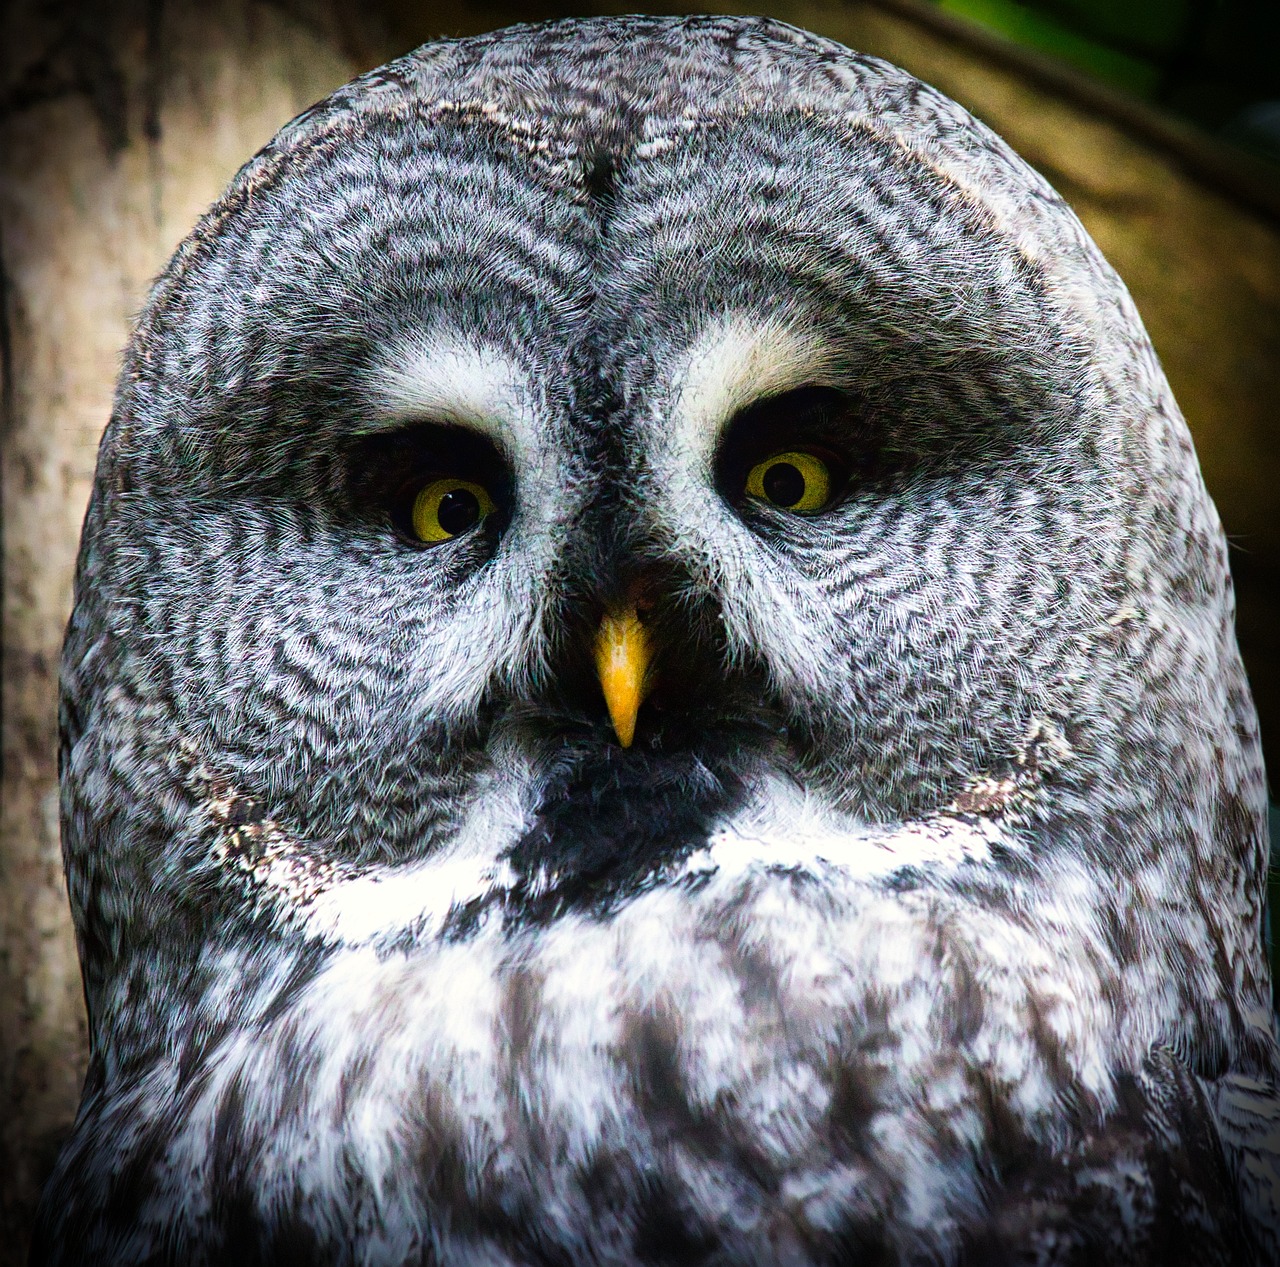 a close up of an owl's face with yellow eyes, a portrait, museum quality photo, color and contrast corrected, eyes in the trees, head slightly tilted